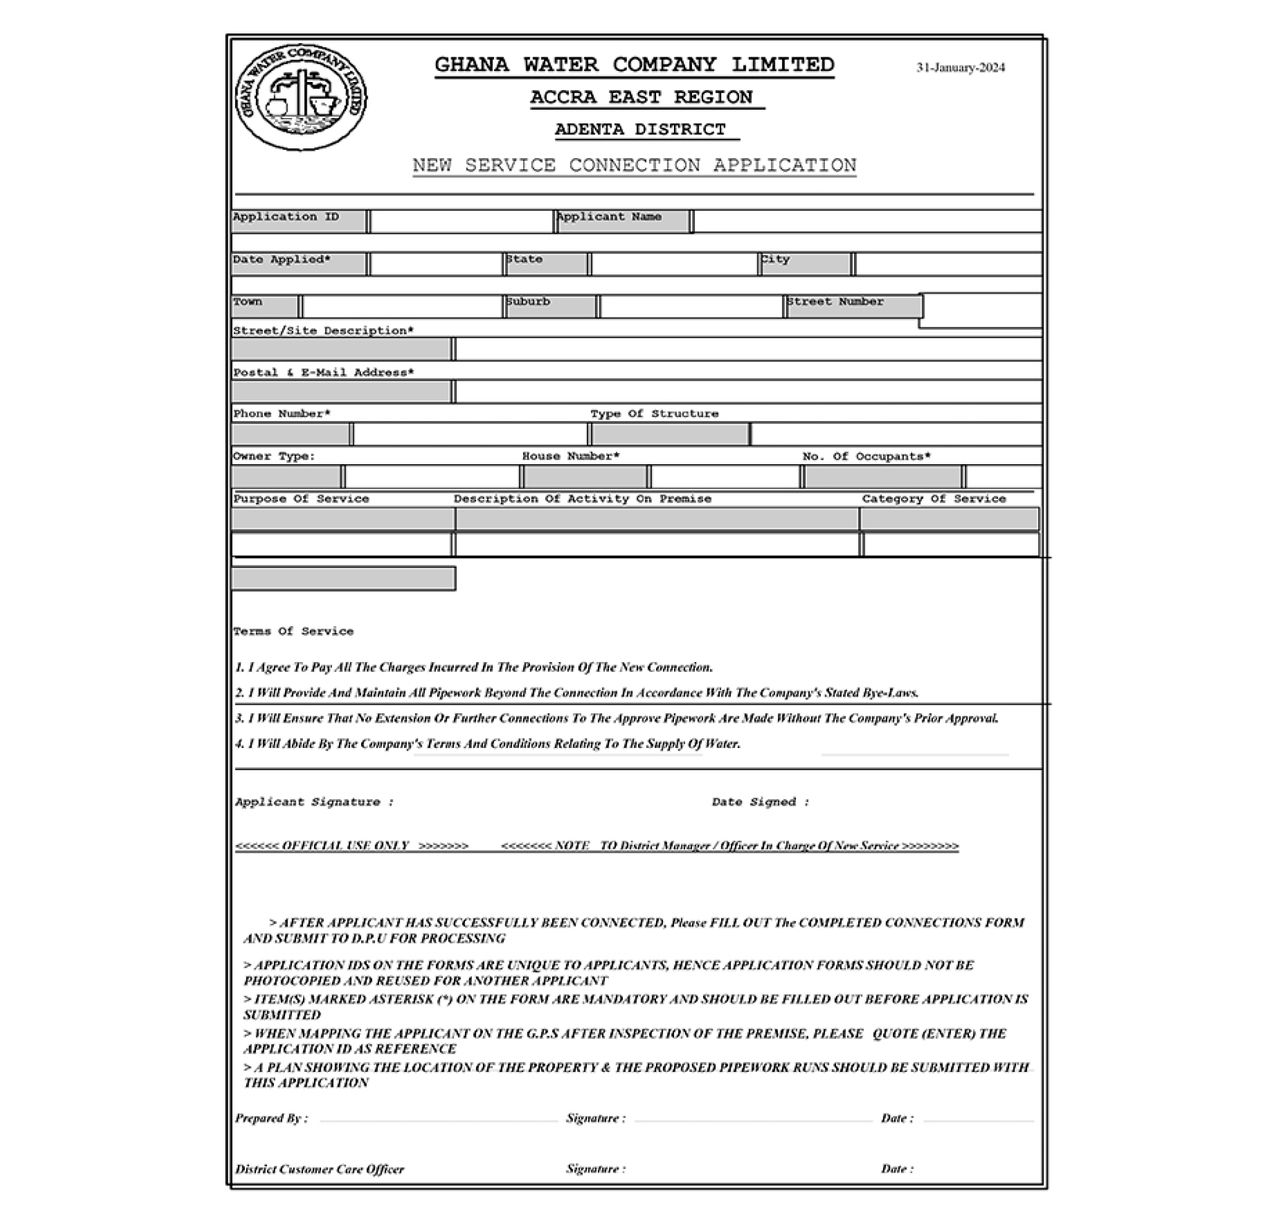 The image is a blank fillable form for applying for a new service connection with the Ghana Water Company Limited